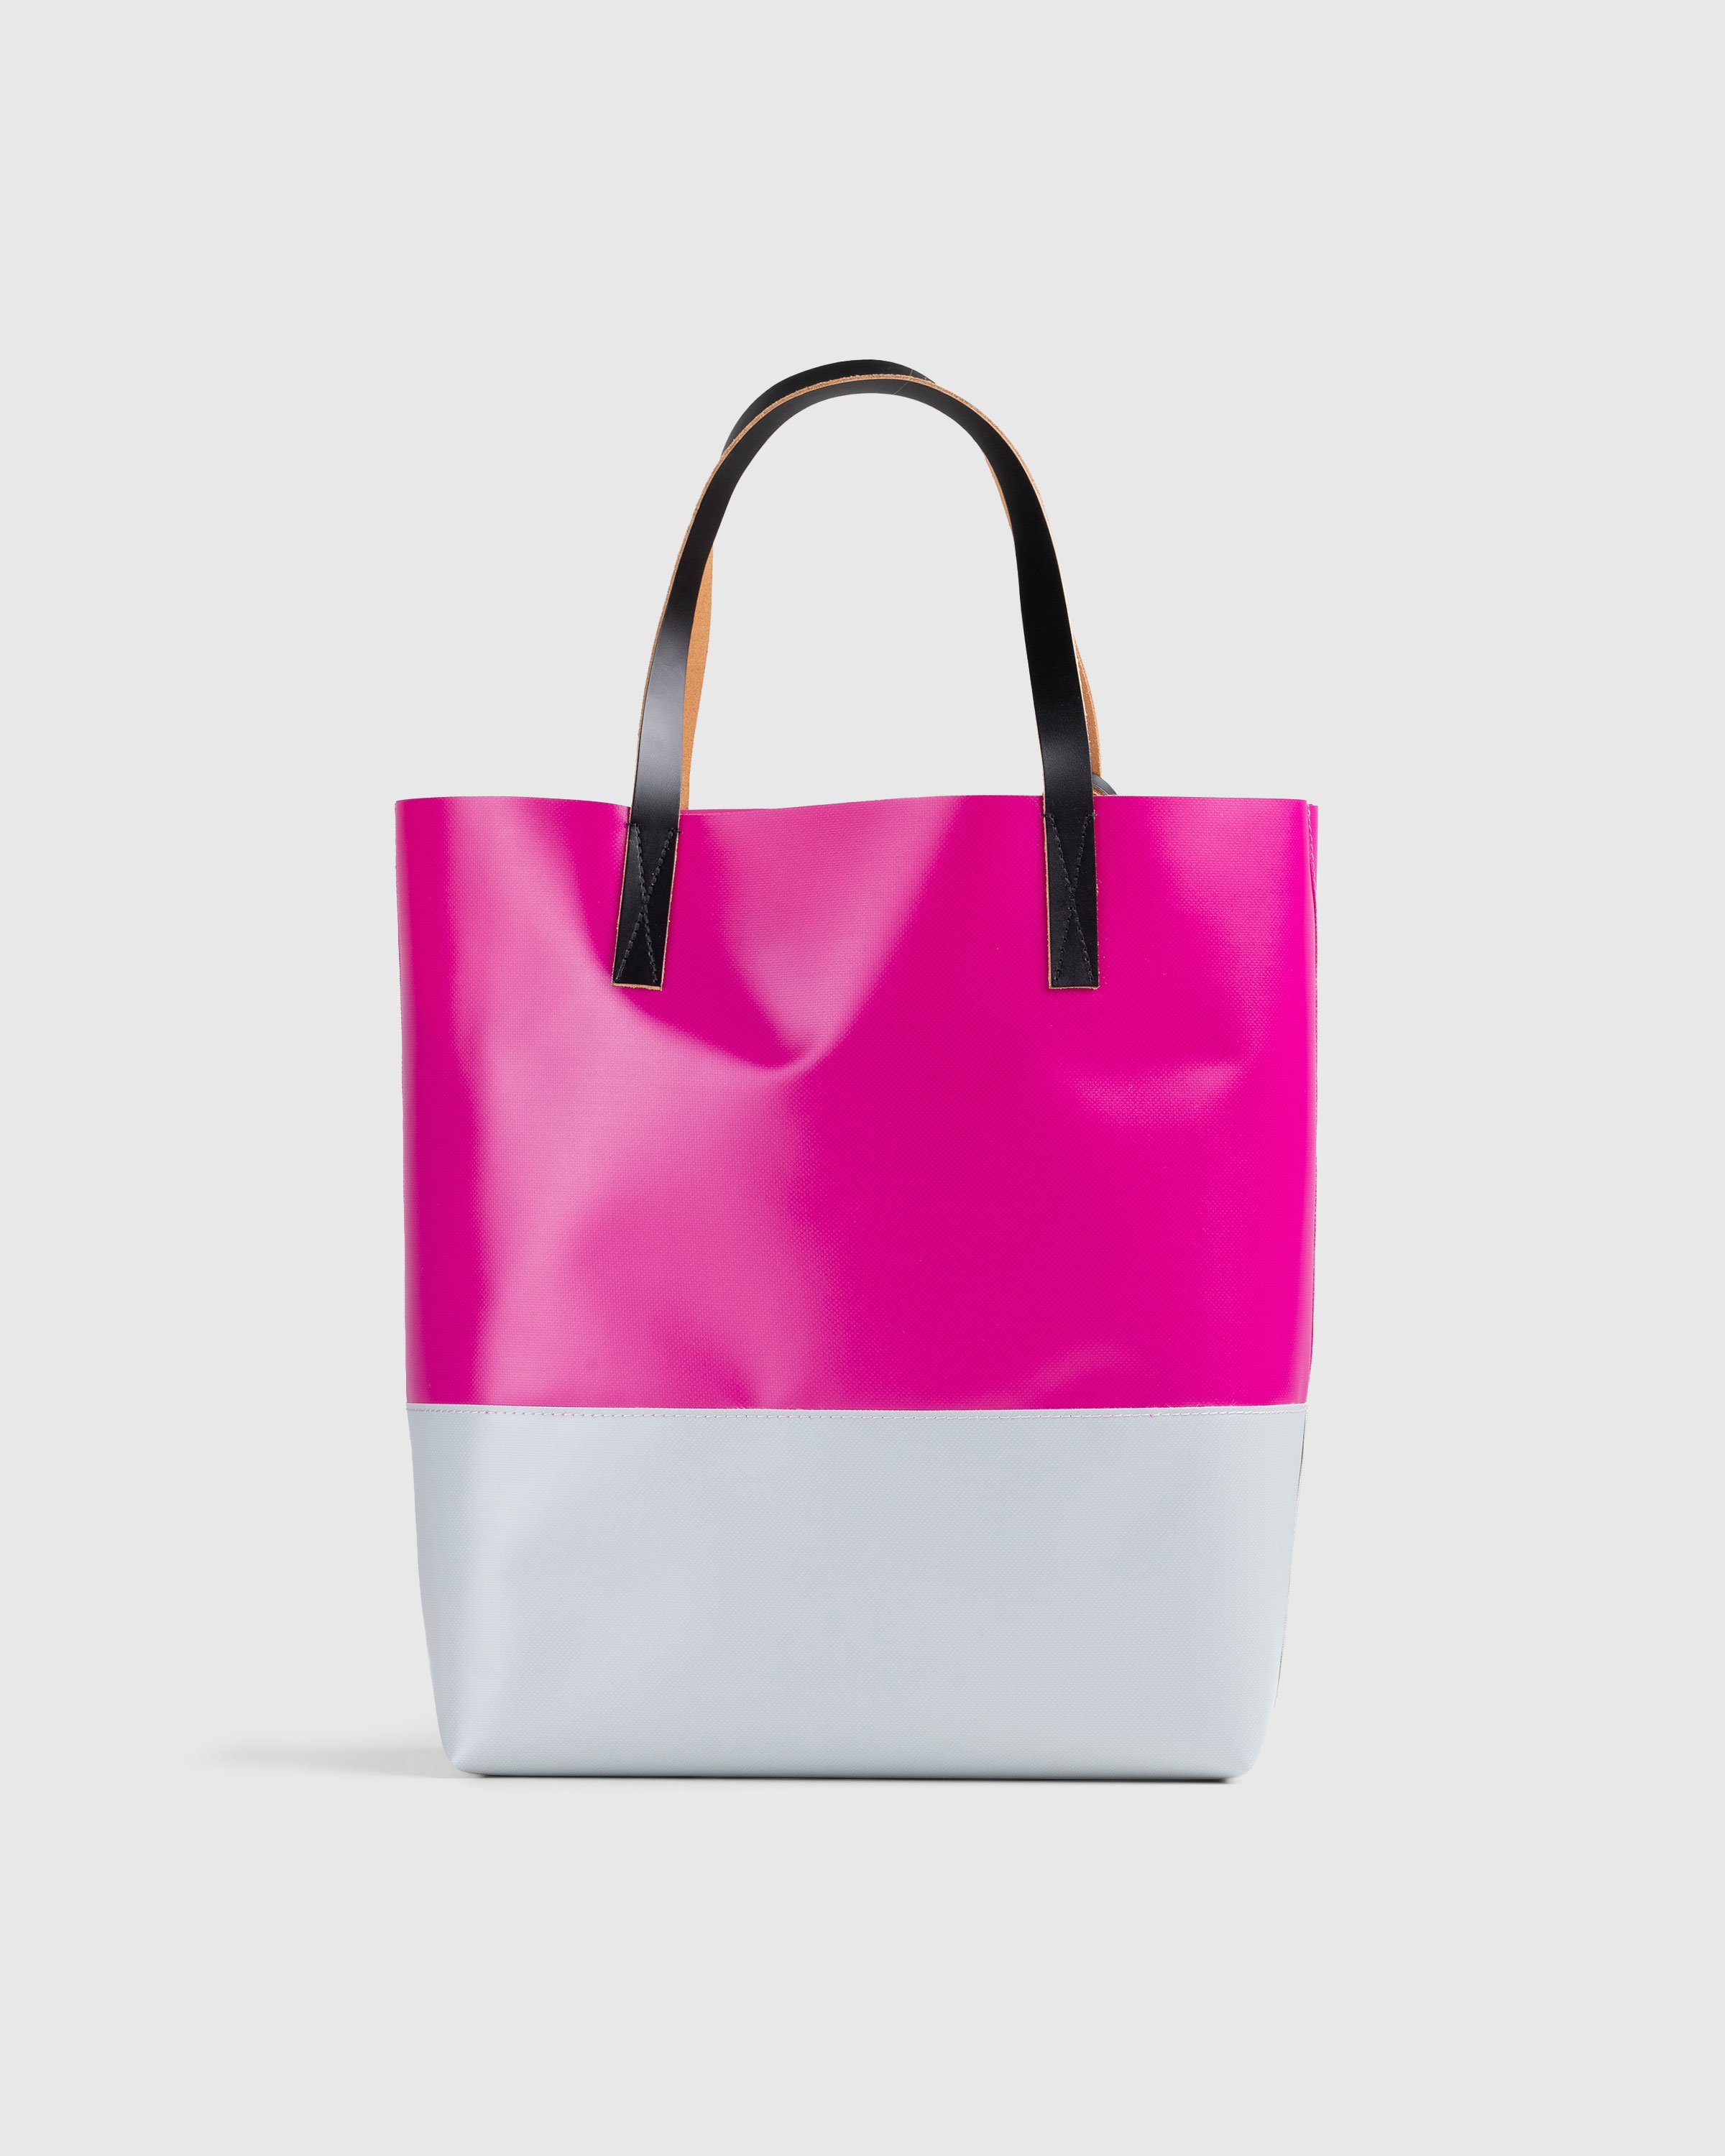 Marni - Tribeca Two-Tone Shopping Bag Pink/Grey - Accessories - Pink - Image 3